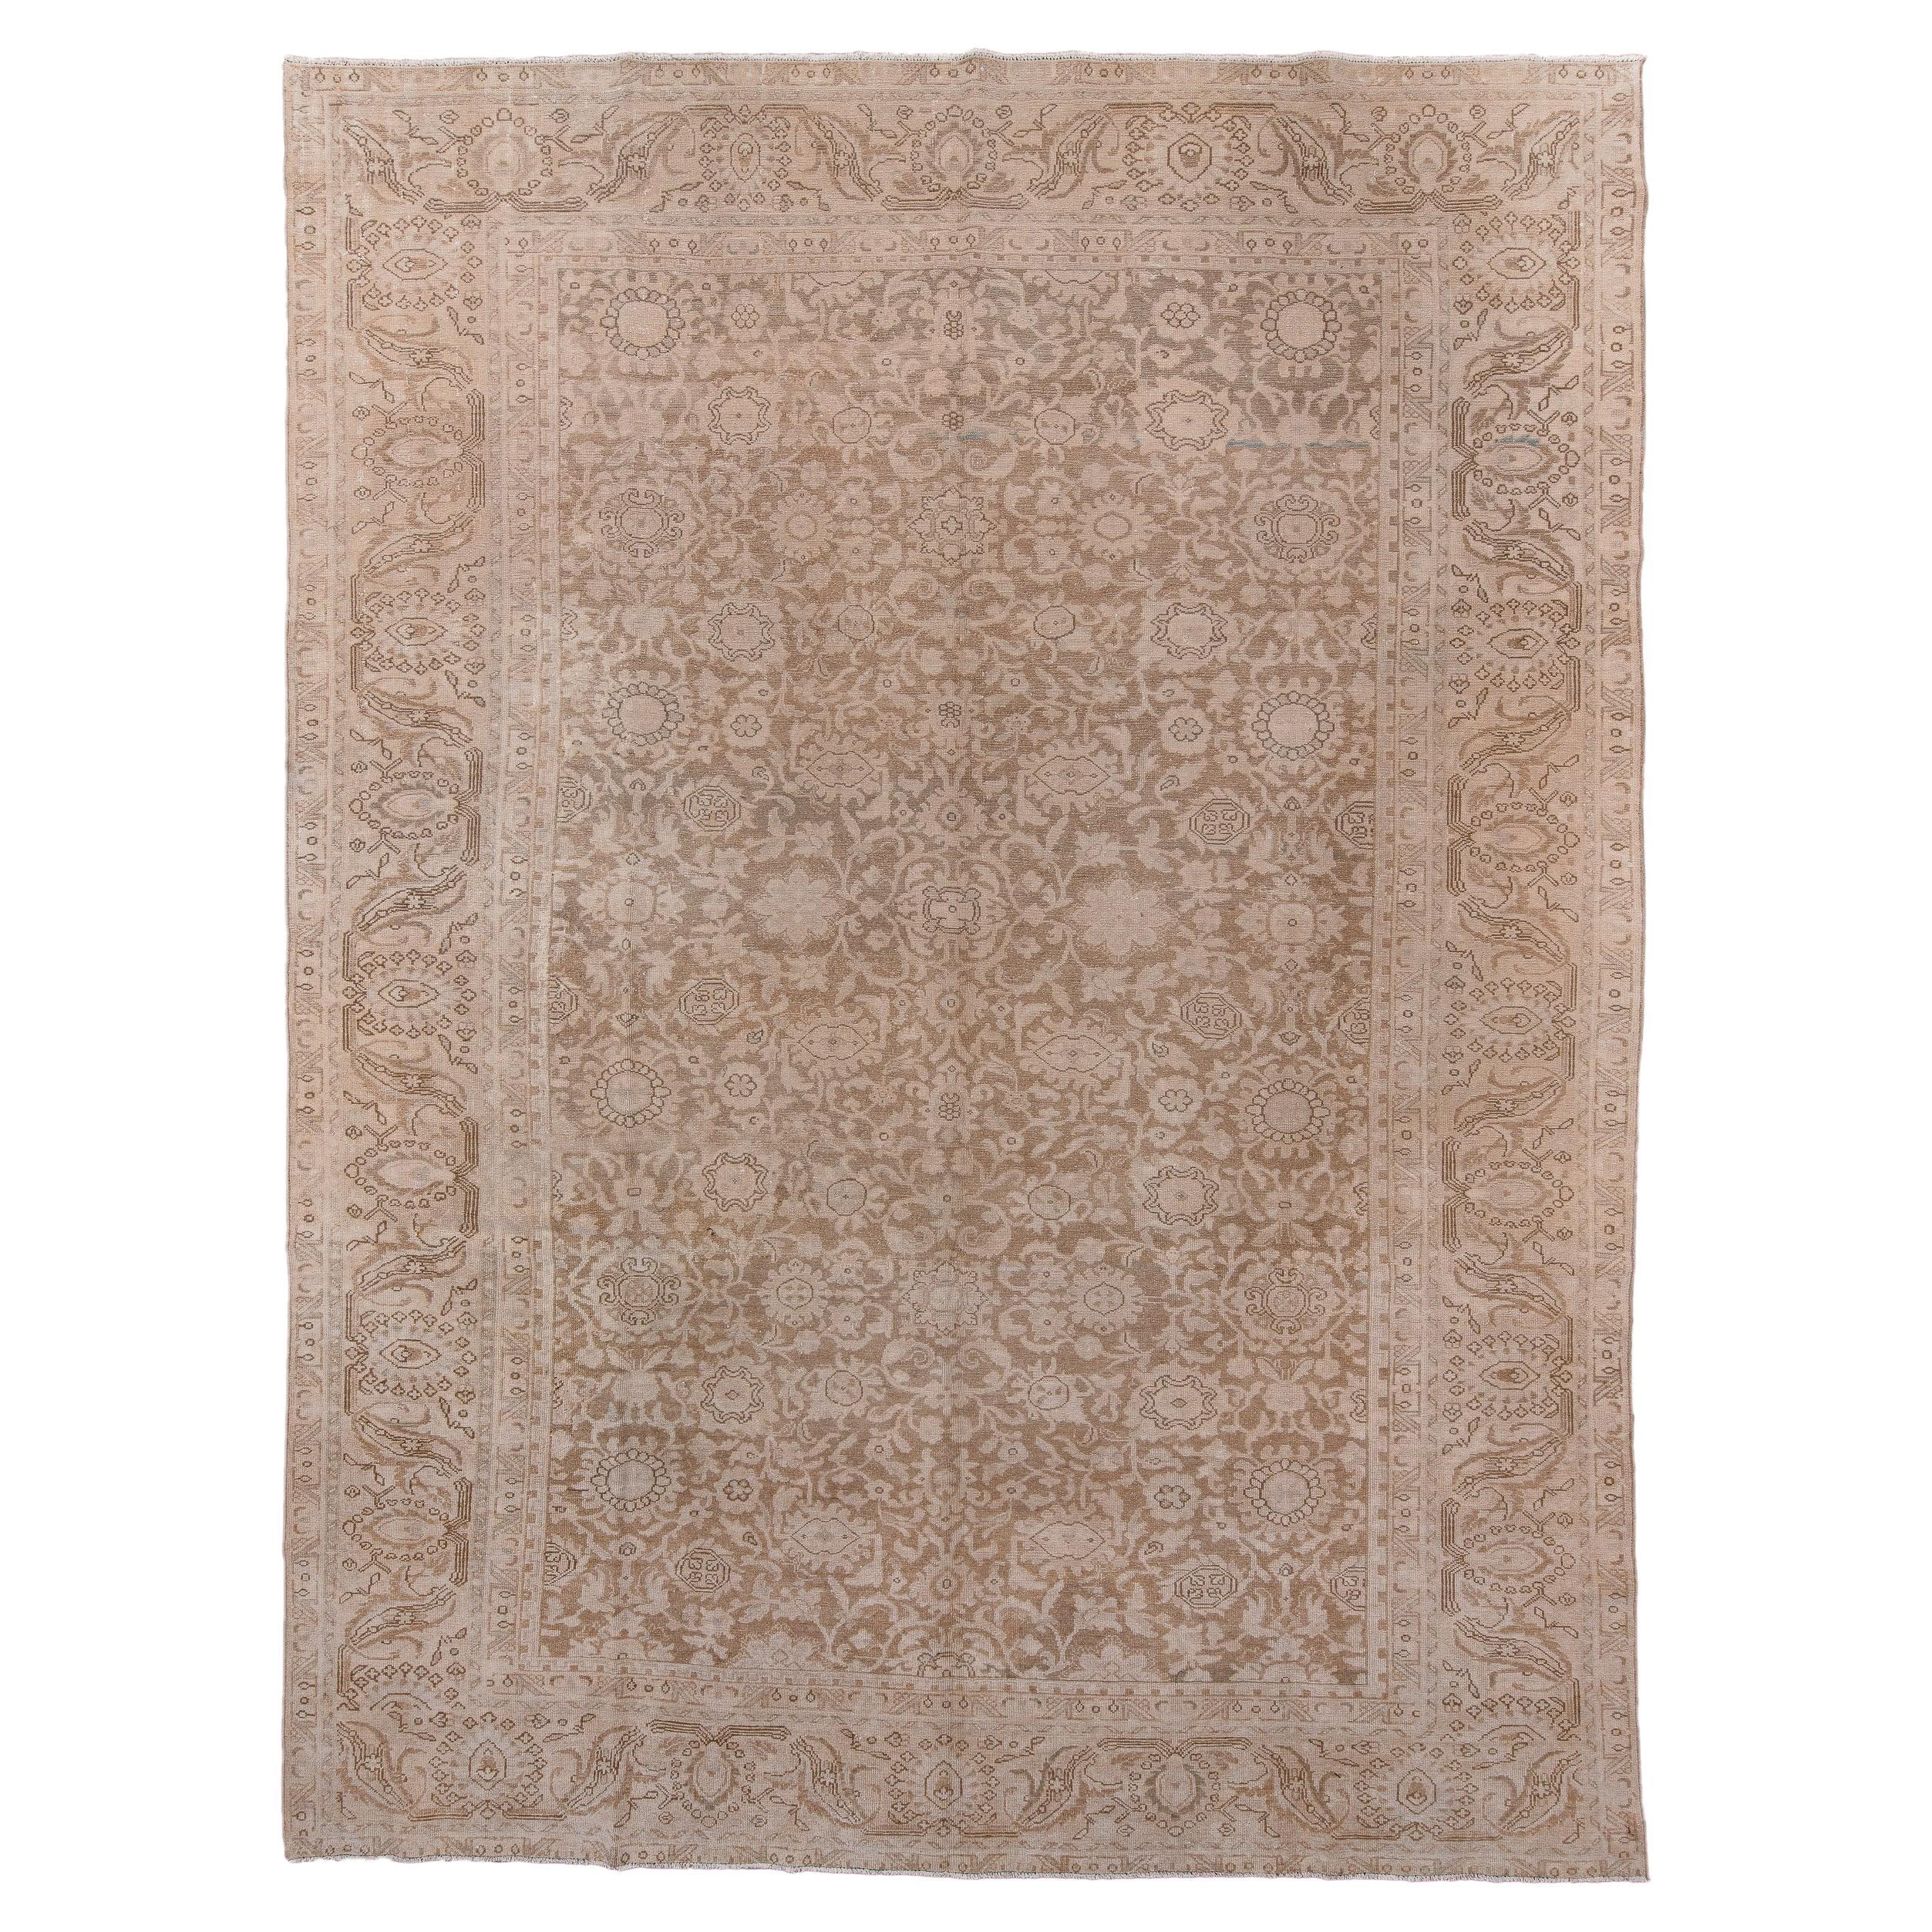 Antique Malayer Rug with Soft Simple Palette For Sale